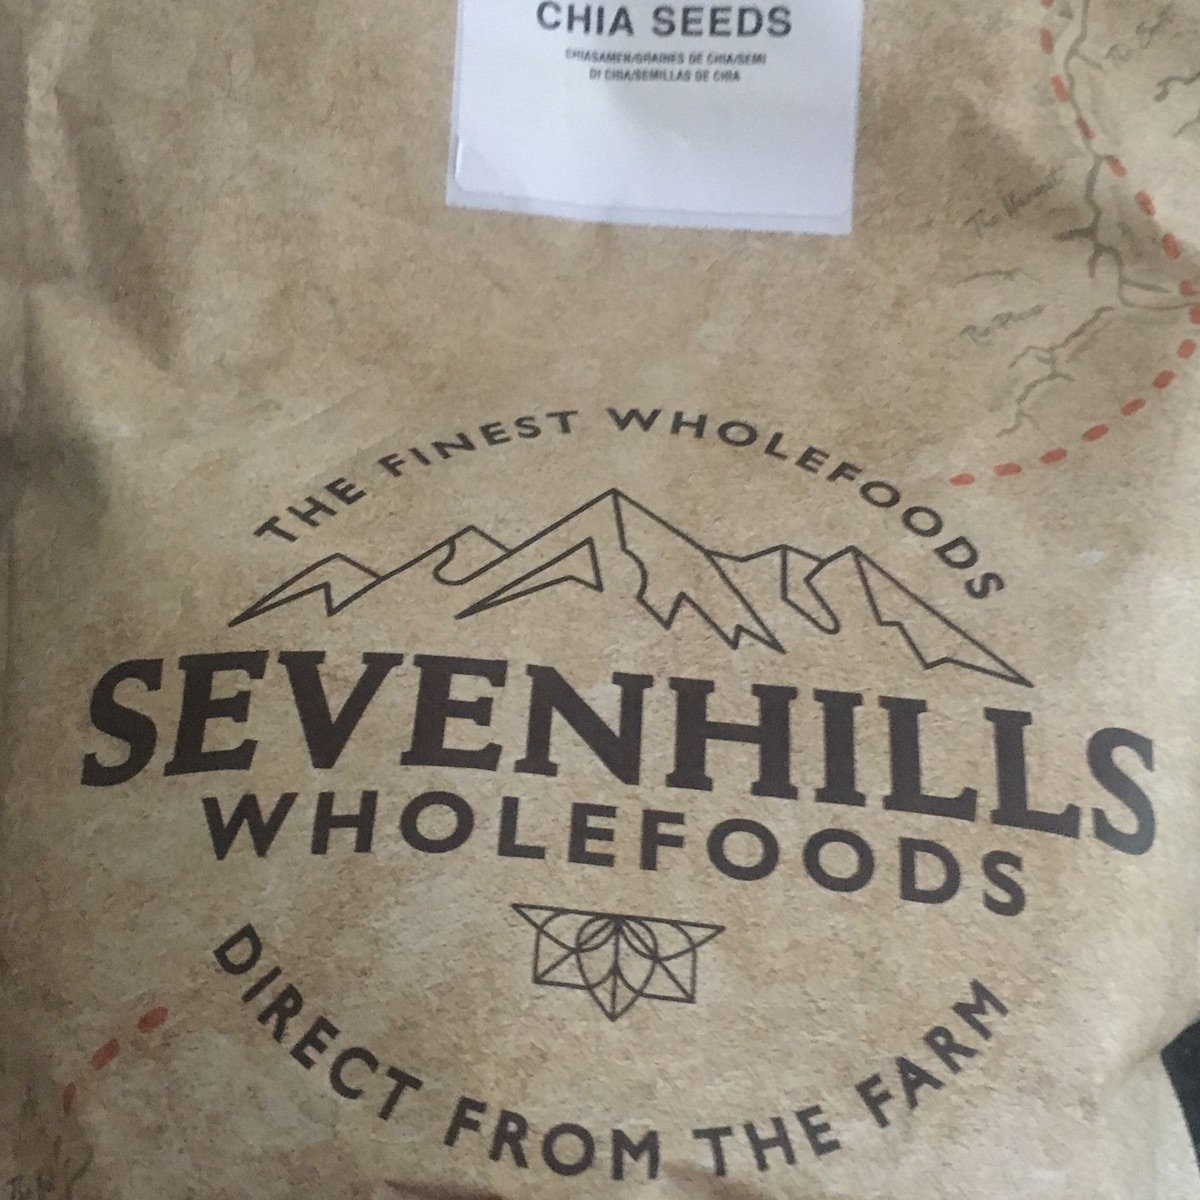 About Sevenhills Wholefoods